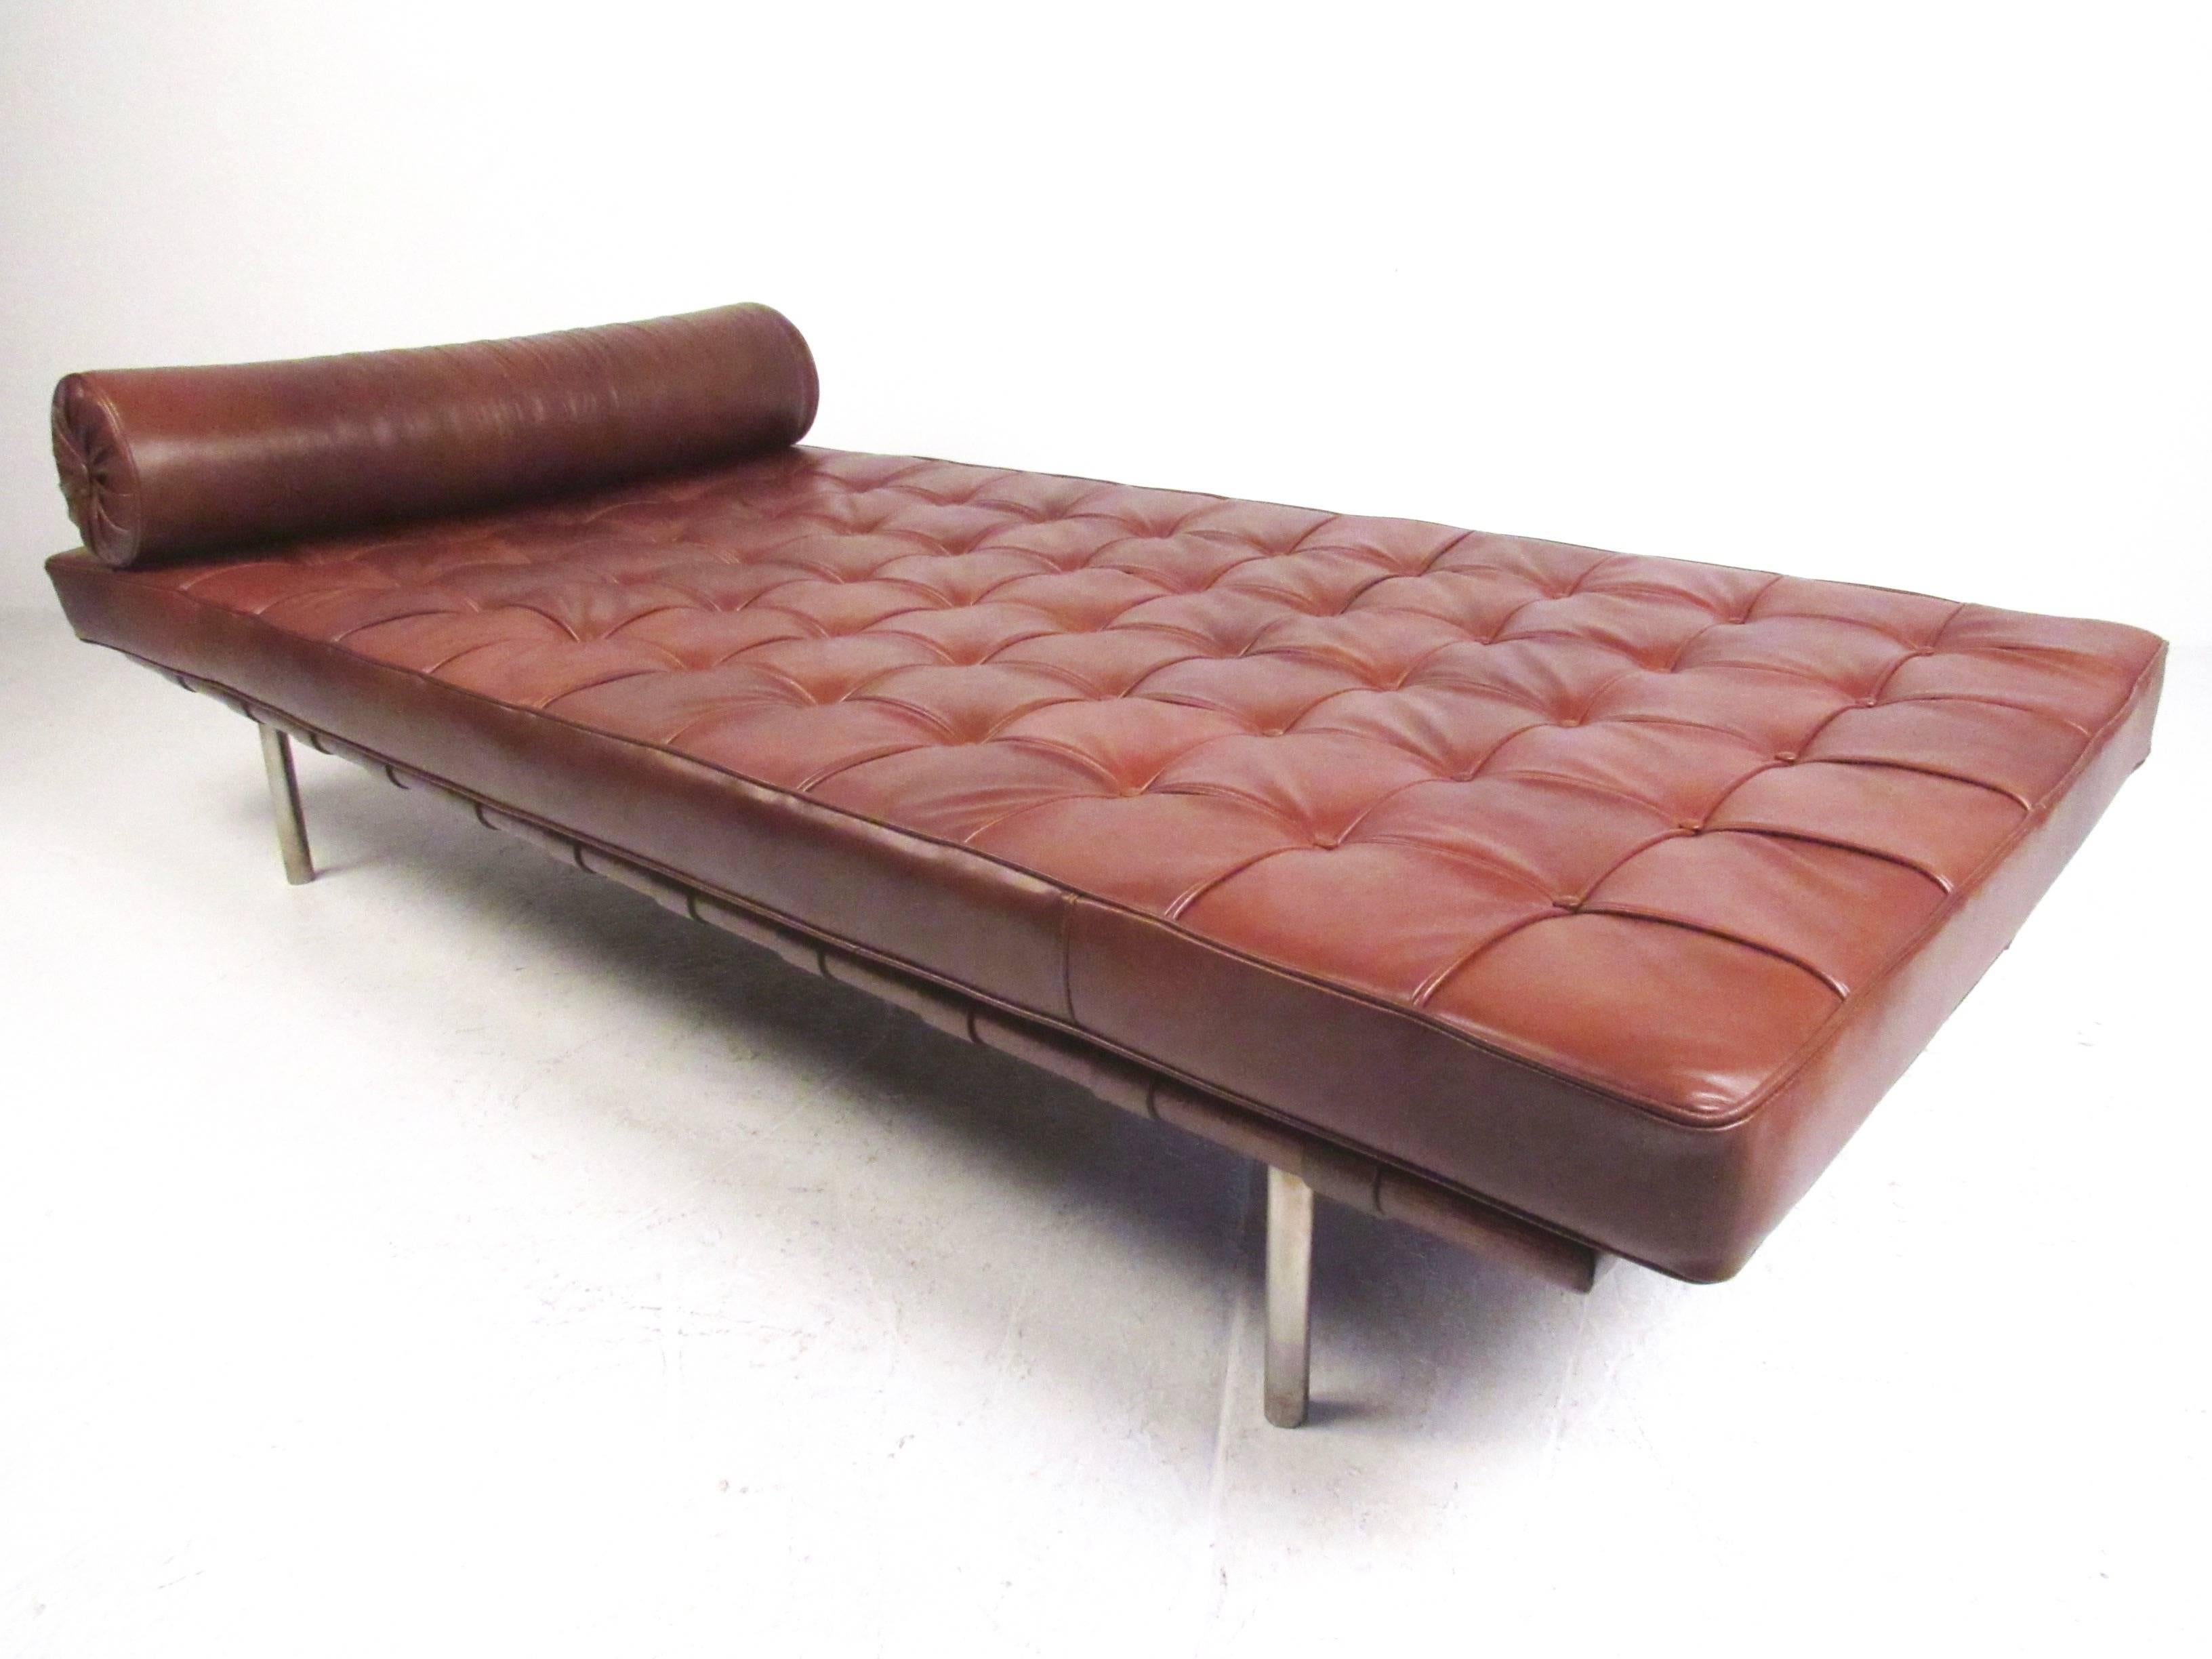 This stylish Mid-Century Modern daybed by Ludwig Mies van der Rohe was designed for Knoll Associates and features a hardwood frame with leather straps, topped with a plush tufted leather cushion. Matching cylindrical pillow adds style and comfort to